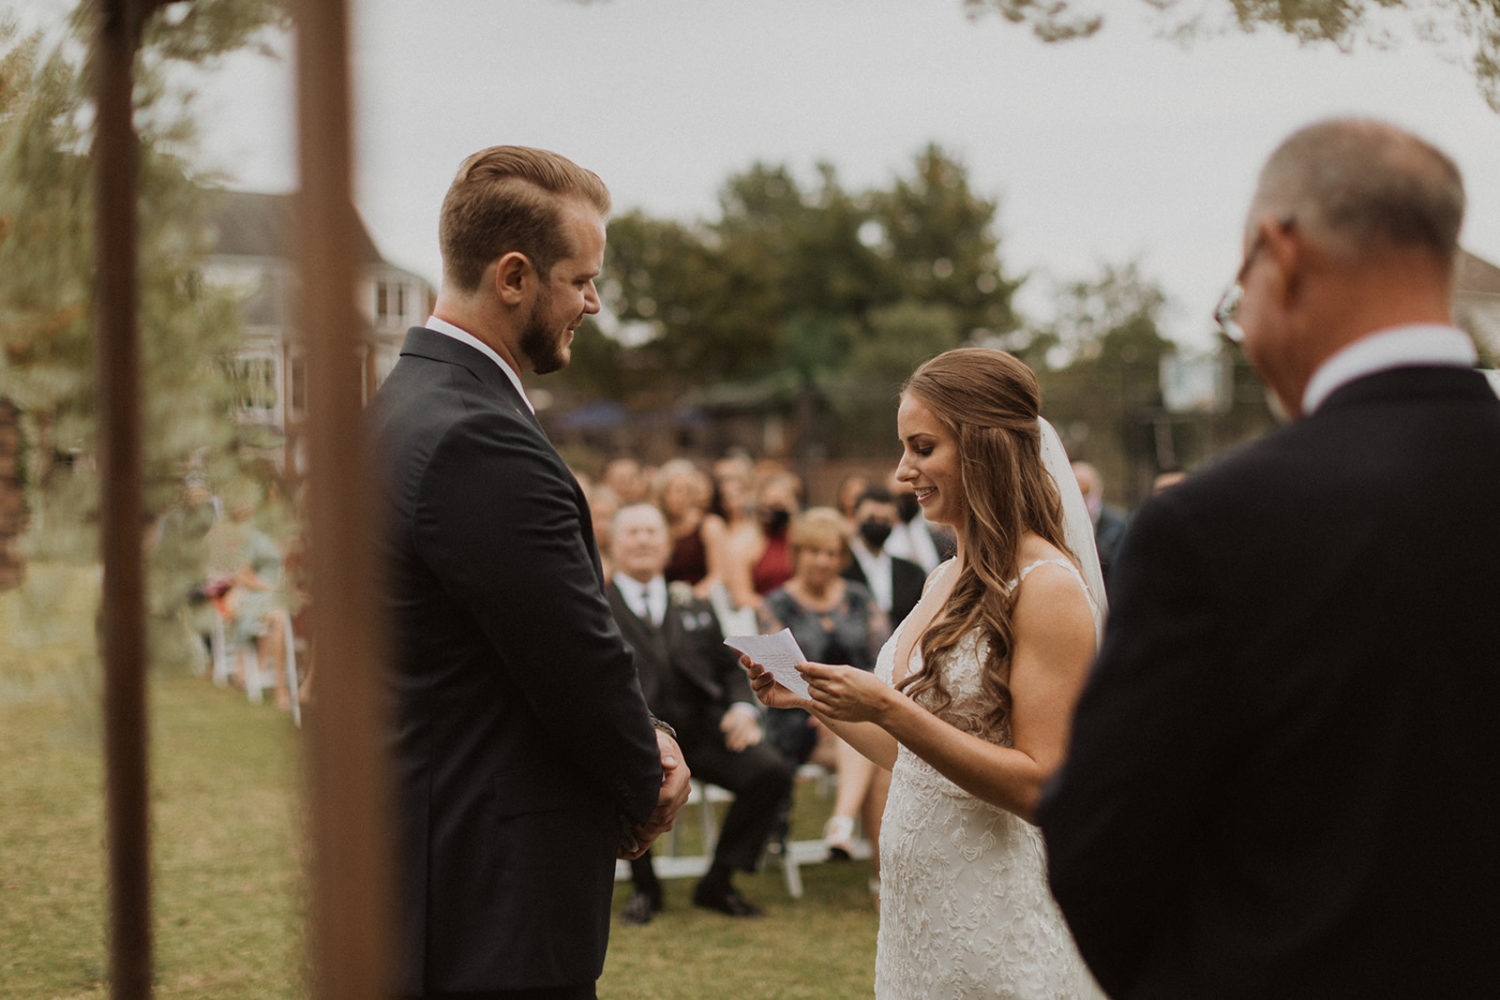 Bride and groom exchange vows during backyard wedding ceremony